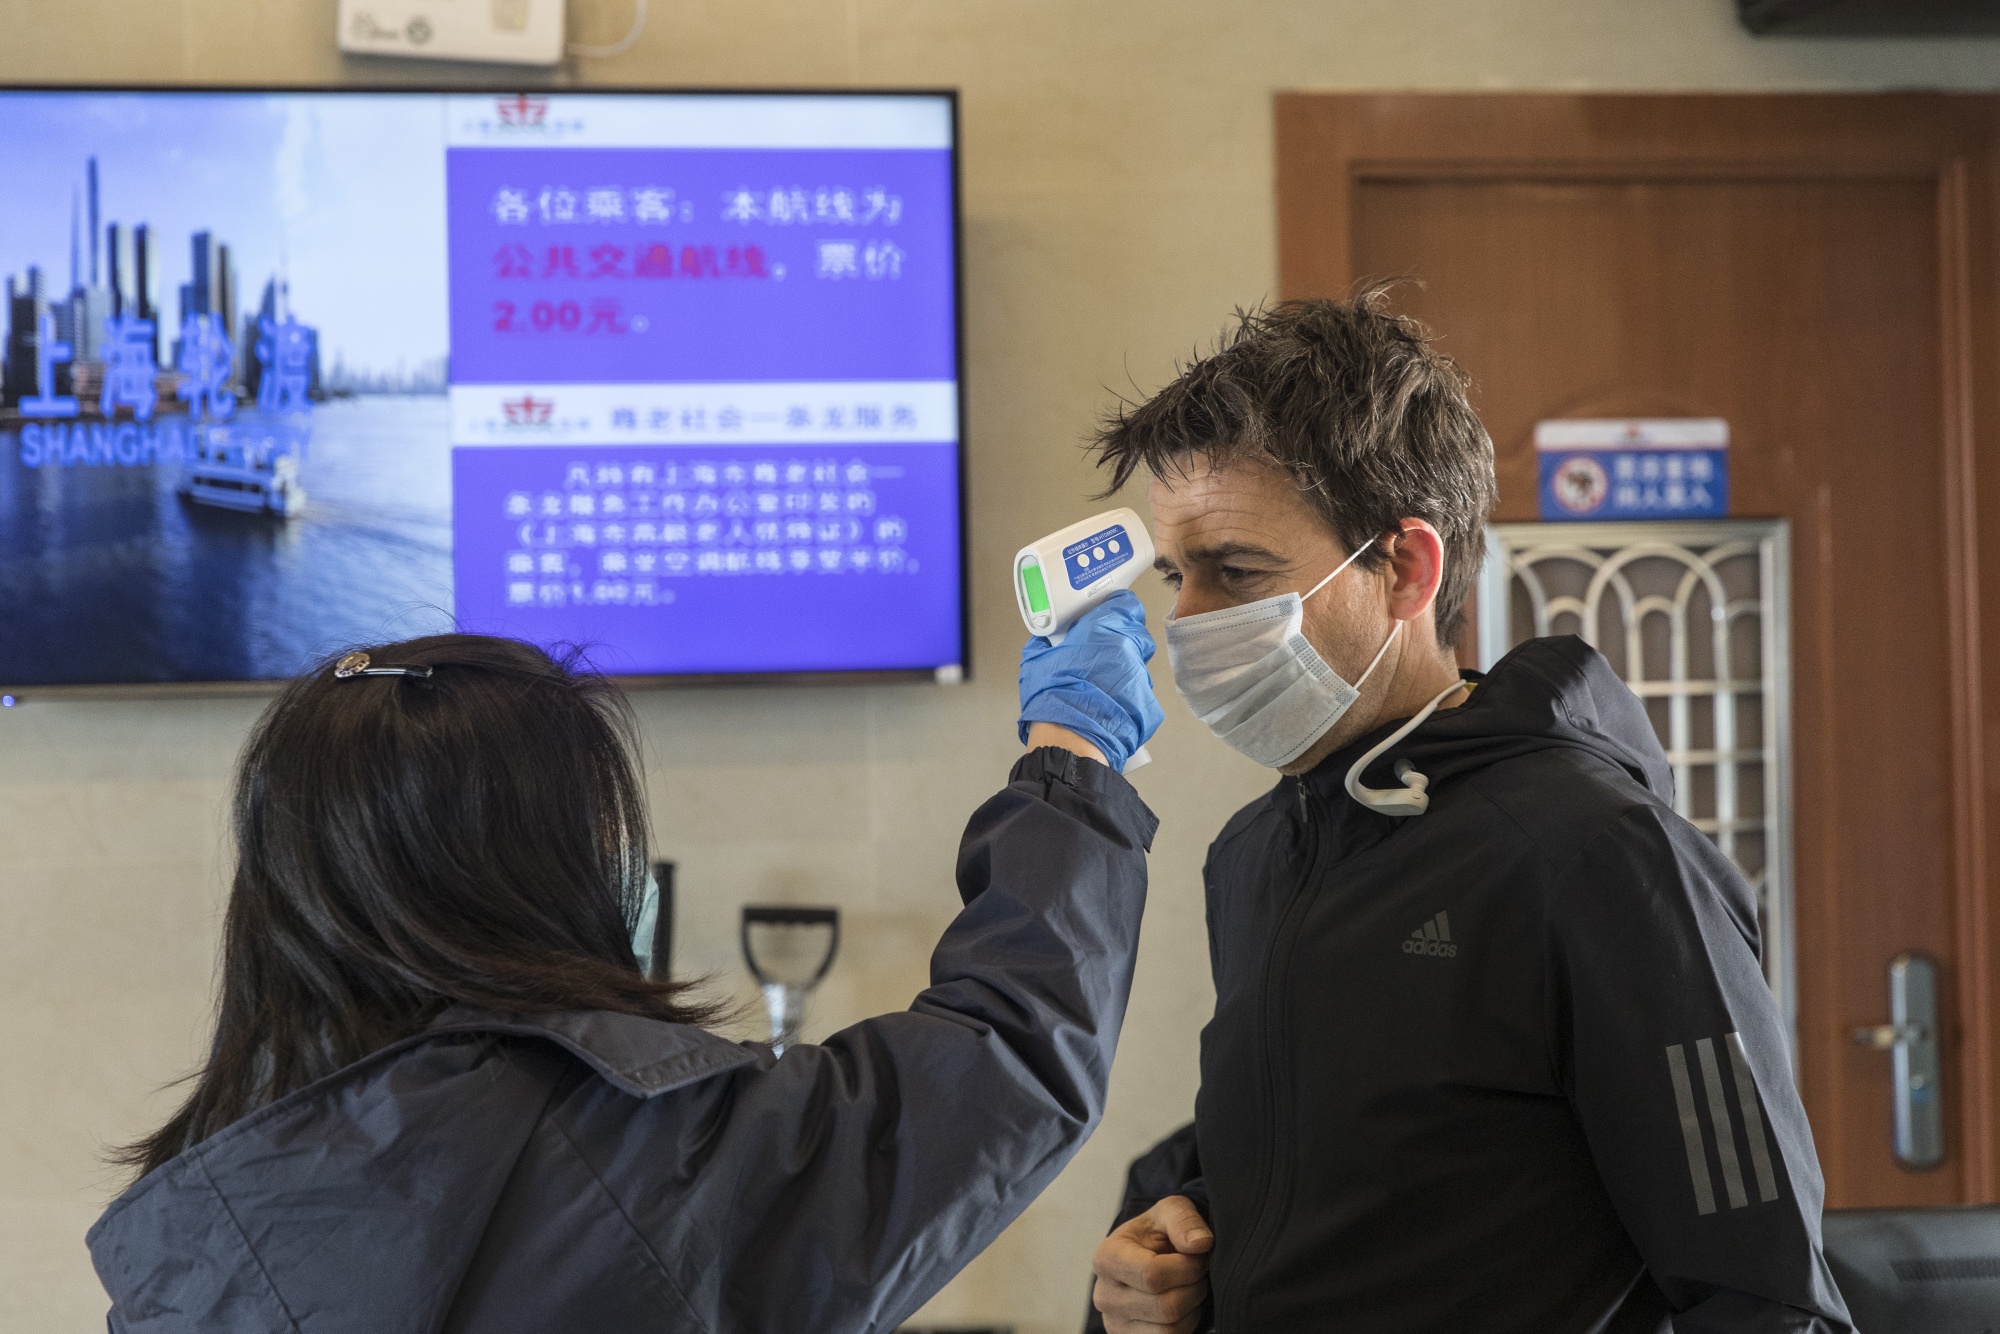 A transit worker takes the temperature of a passenger during a screening at a passenger ferry terminal in Shanghai on Jan. 30.